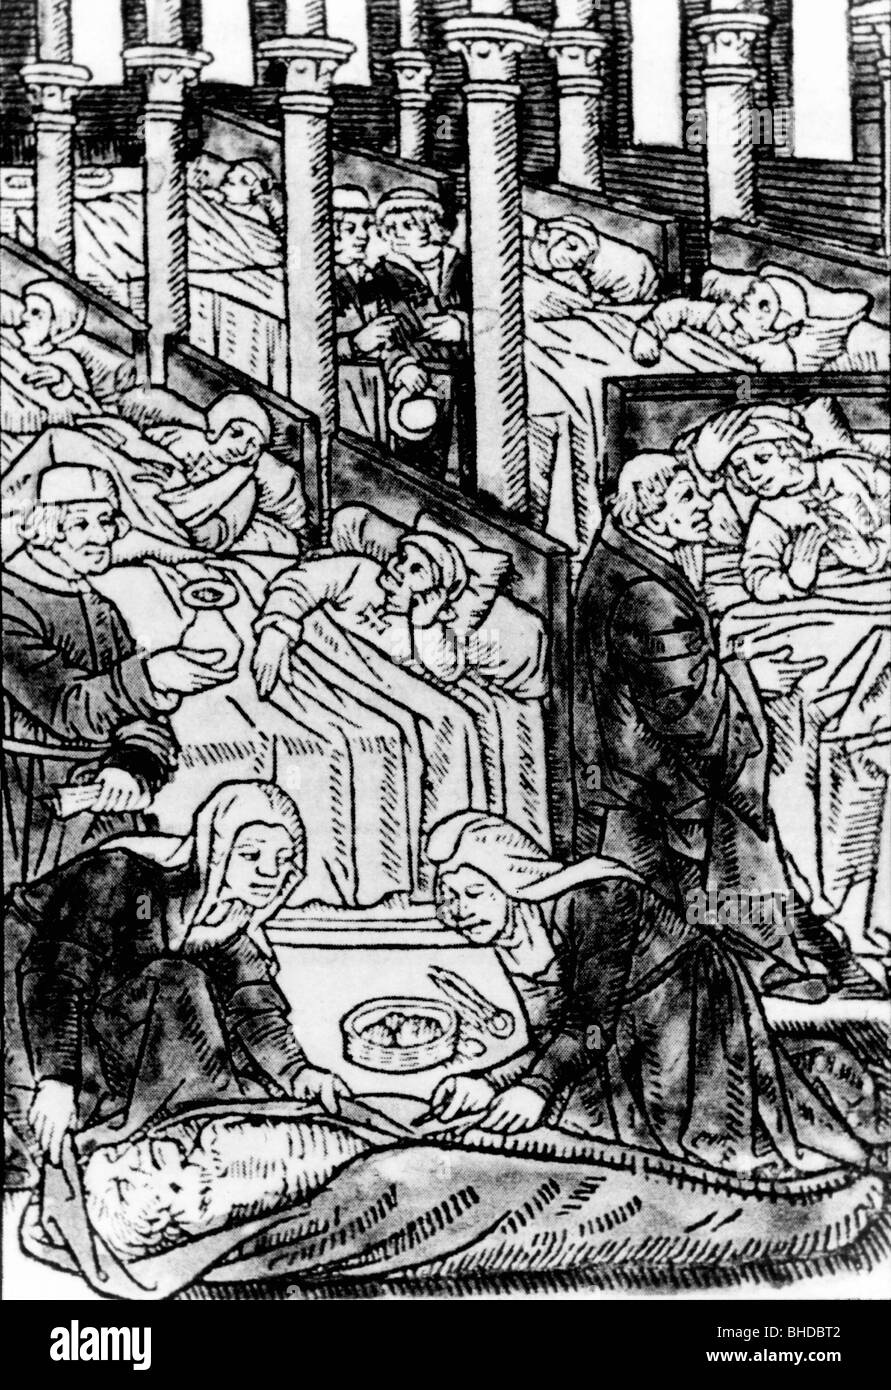 medicine, hospital, health care, woodcut by Jean Petit, 15th century, historic, historical, nursing, home health care, home nursing, medieval times, Middle Ages, monks, monk, nun, nuns, death person, body, sack, corpse, sick-bed, sickbed, sick-beds, sickbeds, patients, sick bay, hospital, sick bays, hospitals, people, Stock Photo